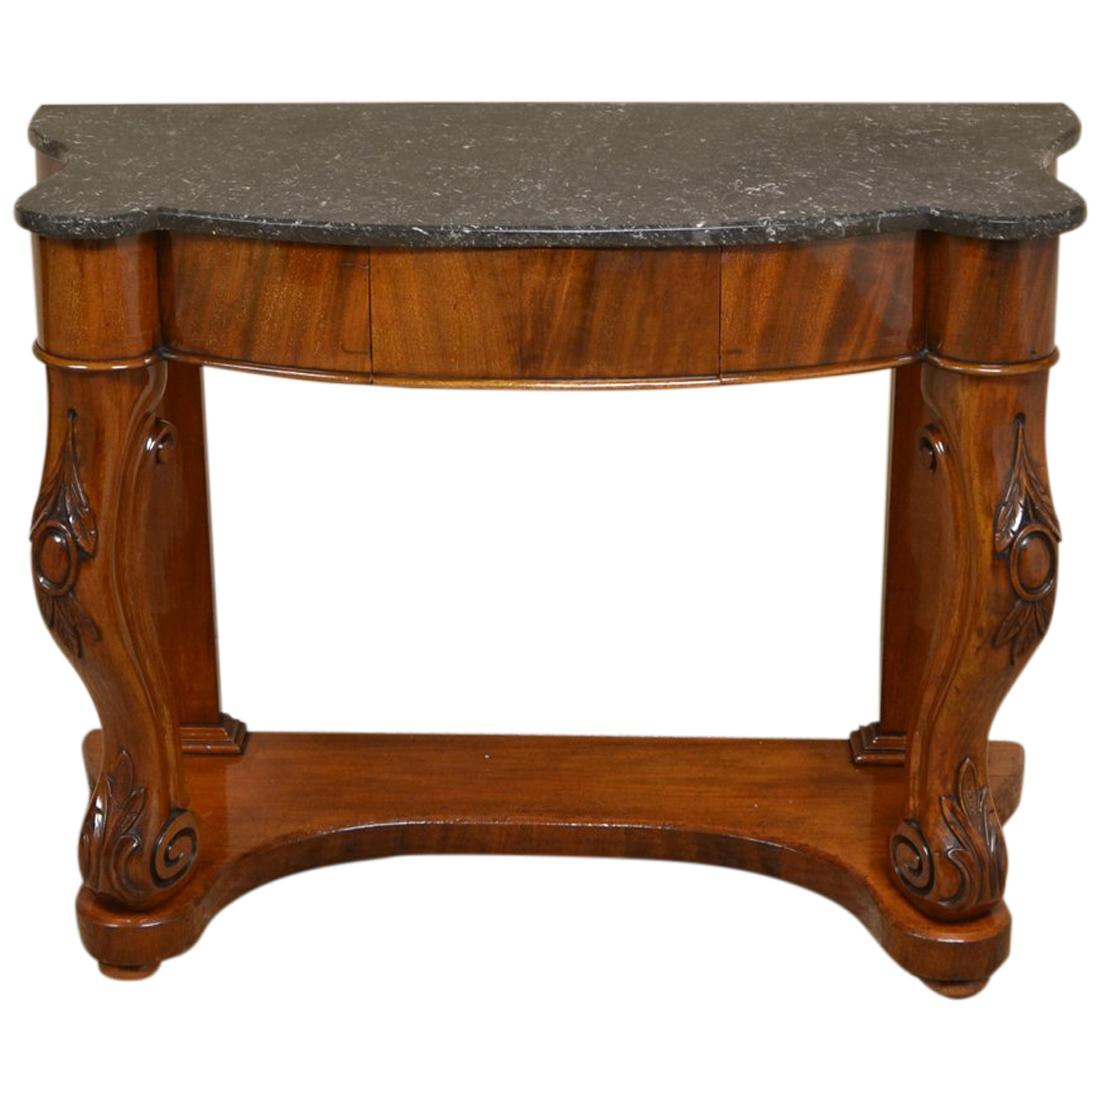 Fine Quality Marble-Top Victorian Antique Console Table